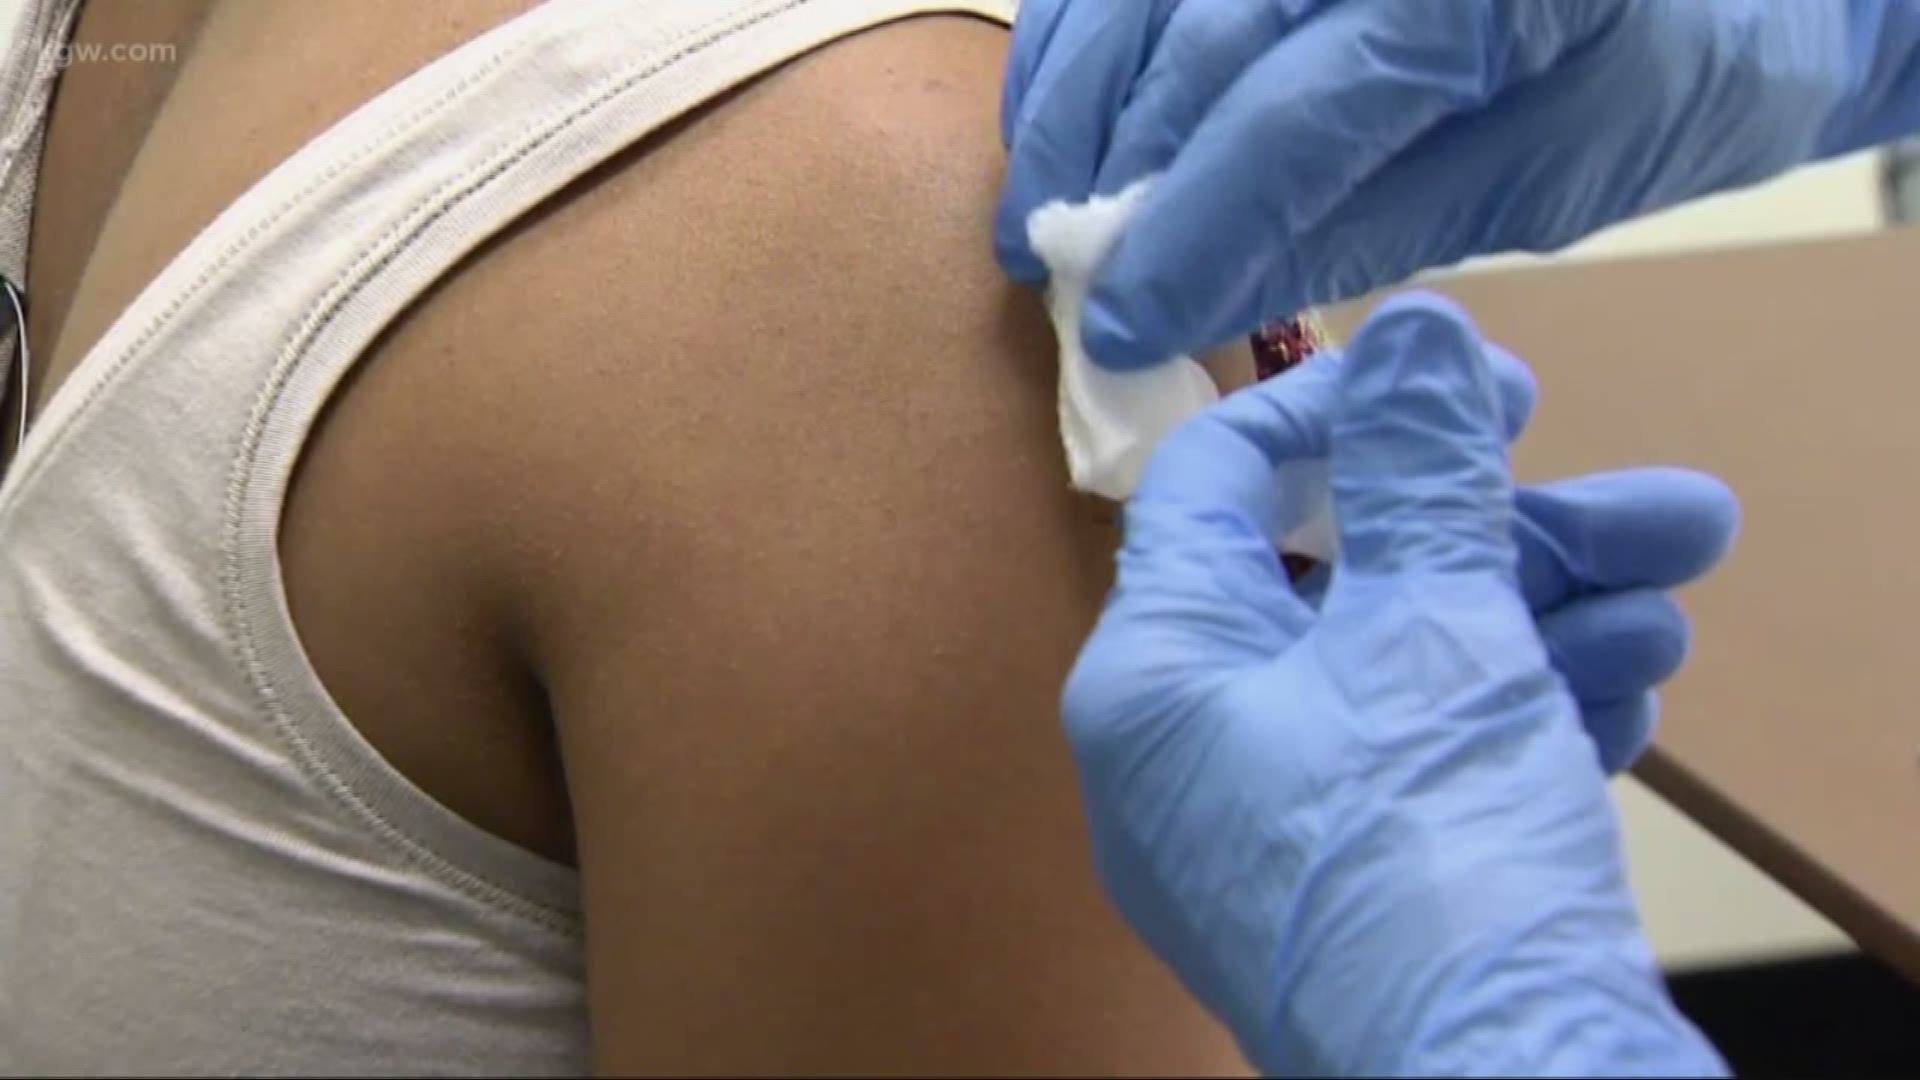 Oregon is slowly starting to see more reported flu cases. Hospitals and medical clinics around the metro area are now seeing flu season taking off.